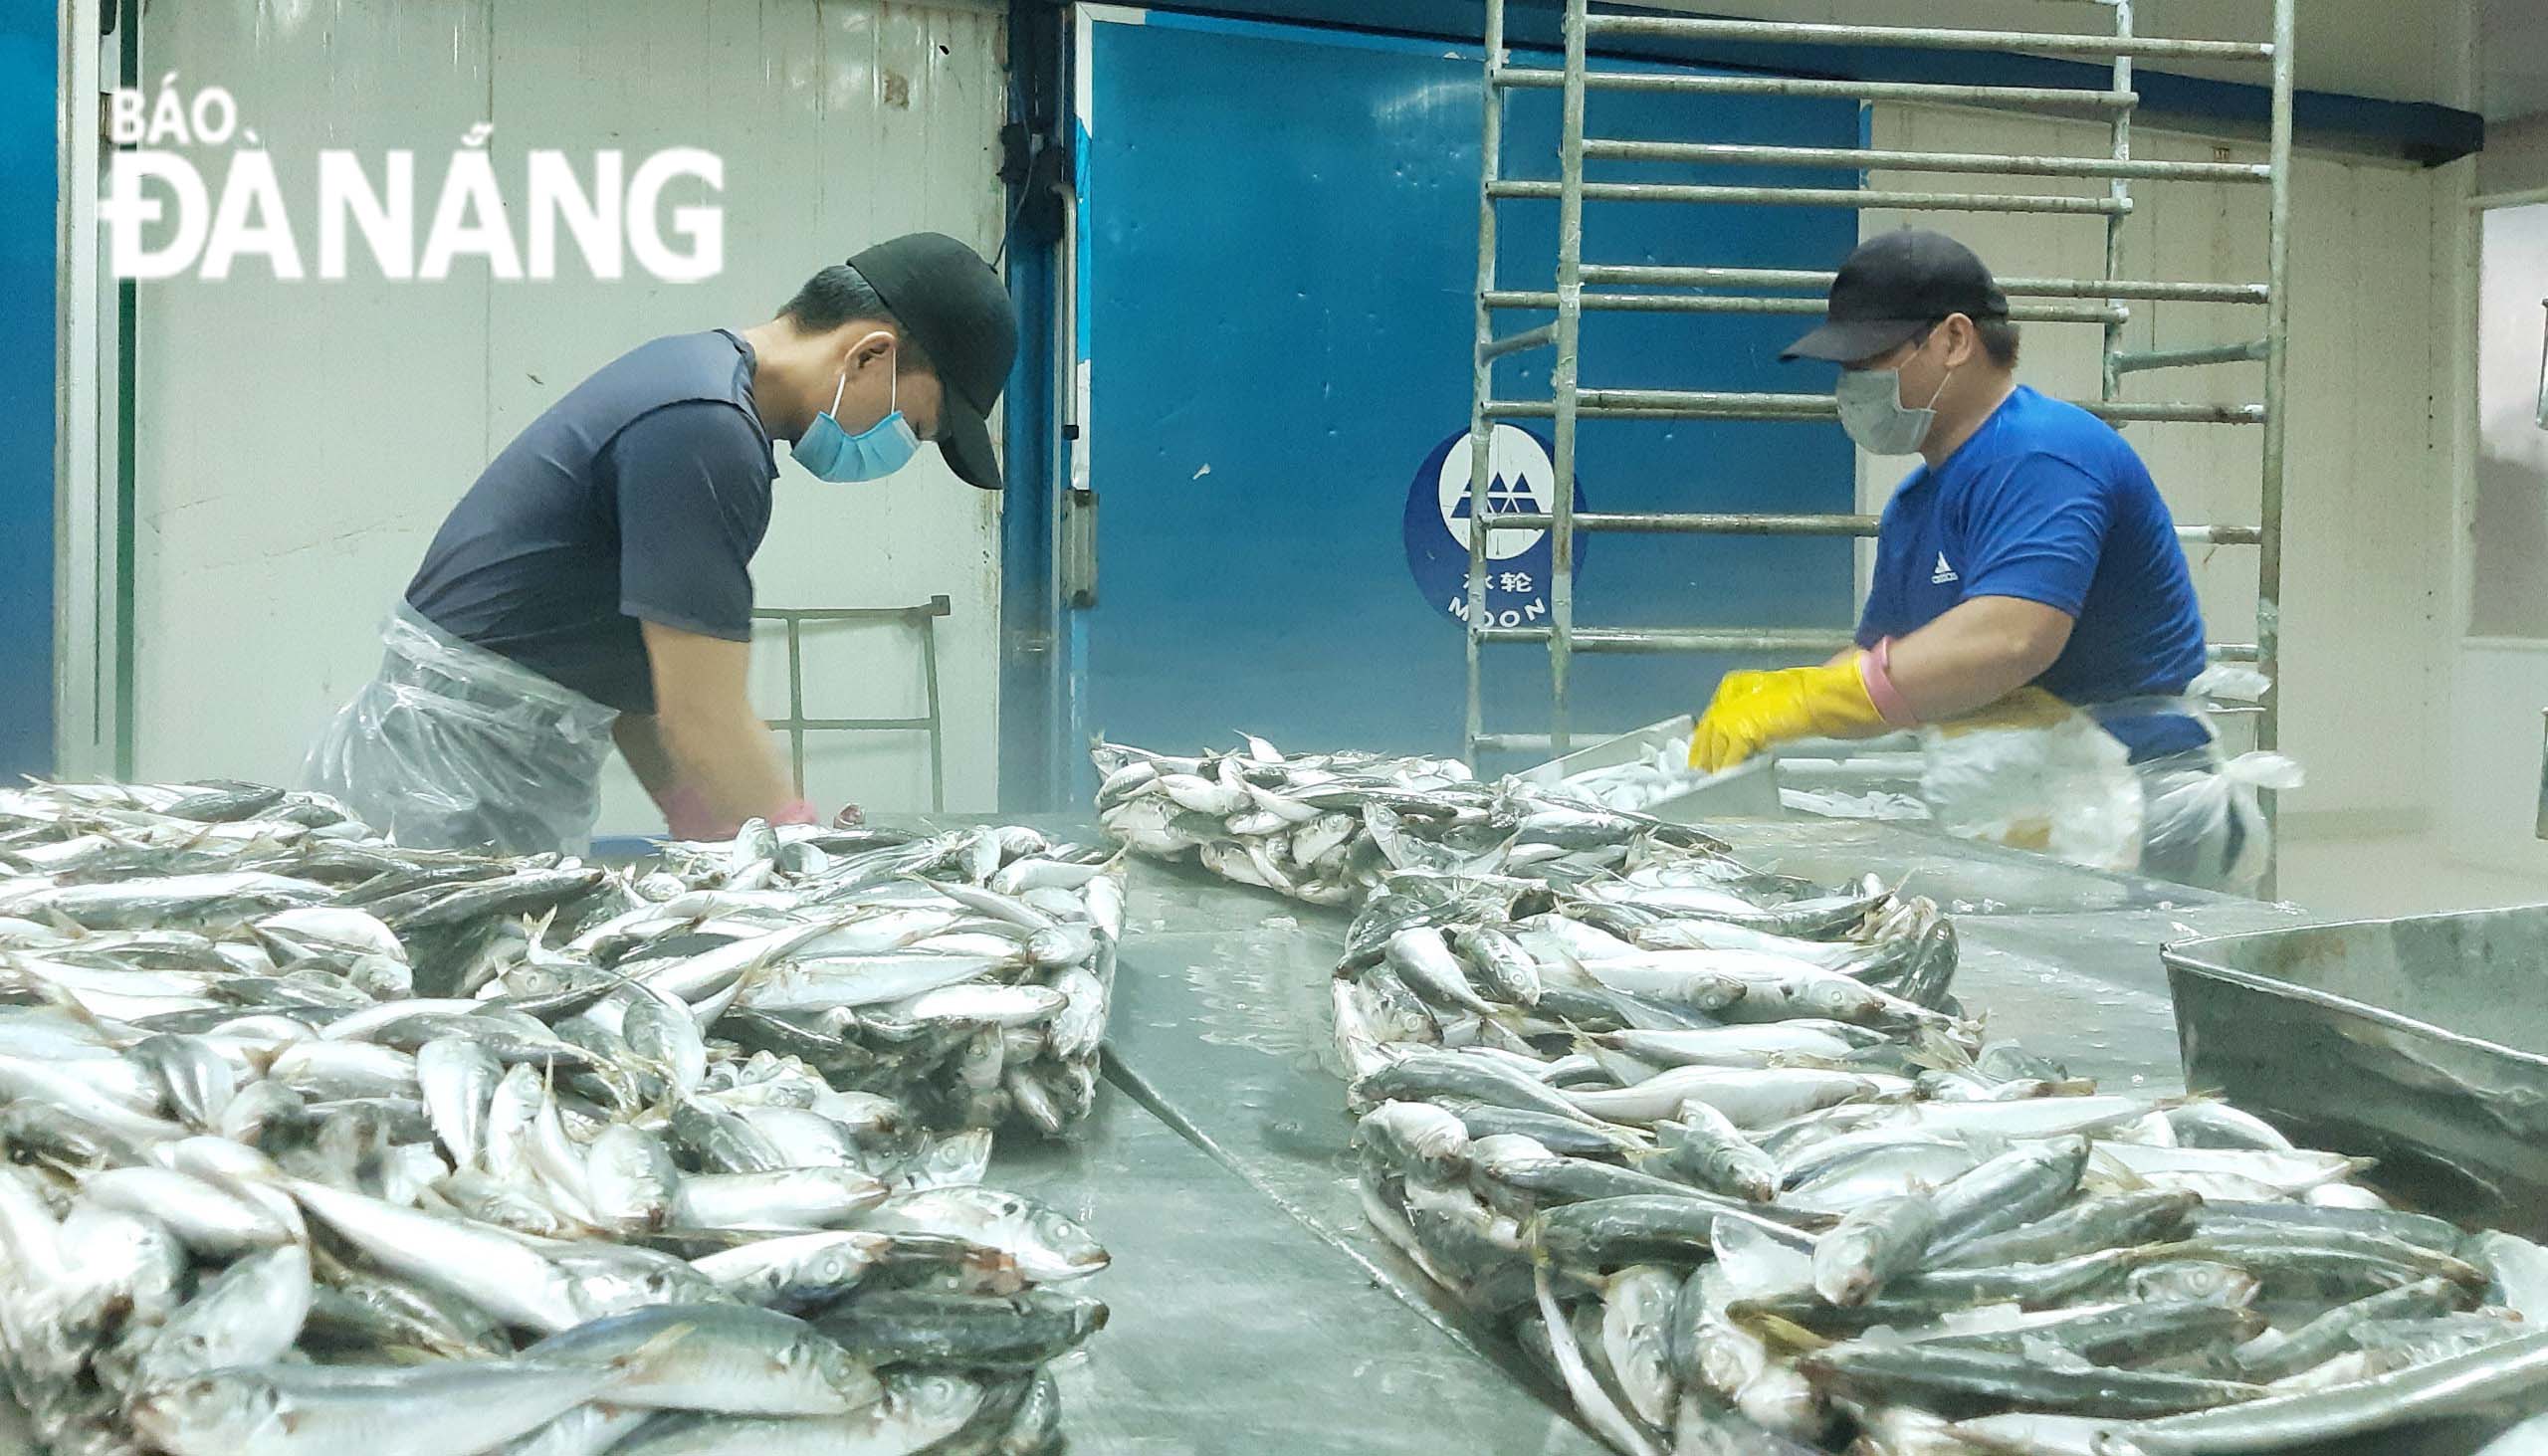 Fresh scads are chosen as gifts for residents living in Ho Chi Minh City. Fish is preliminarily processed, cleaned, and packed in boxes before delivery. 